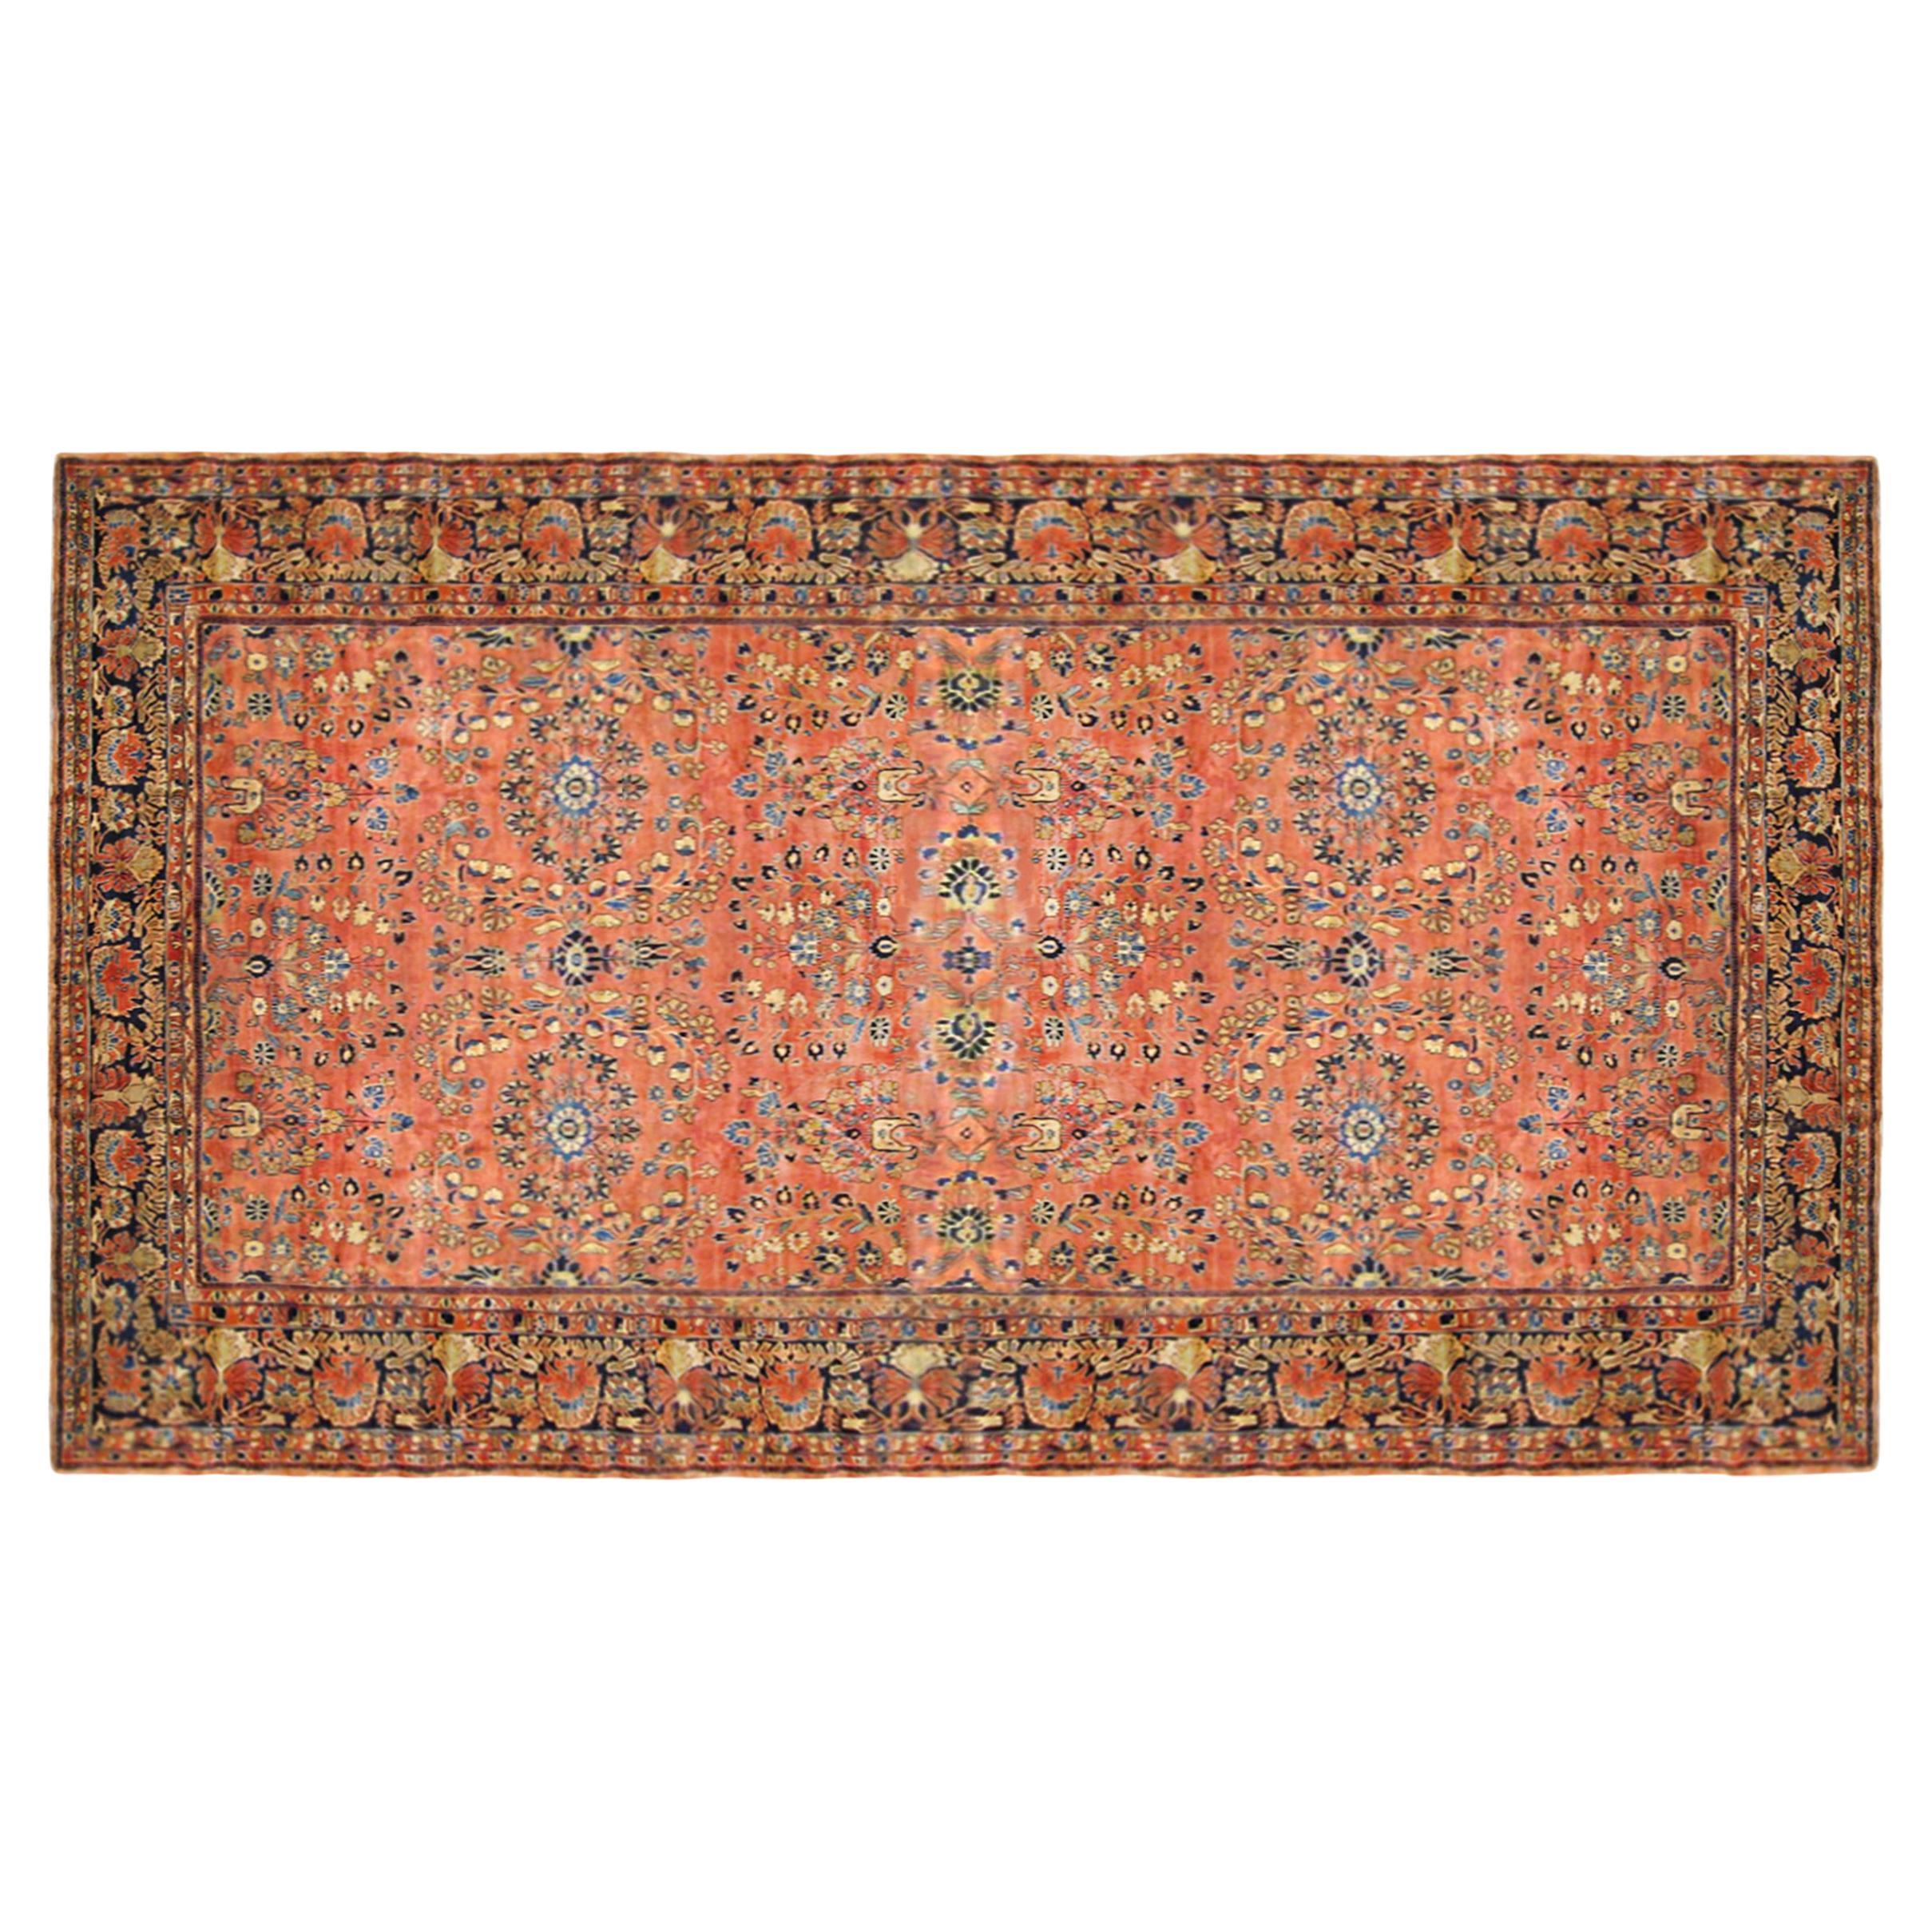 Antique Persian Sarouk Oriental Rug, in Large Size with Intricate Floral Design For Sale